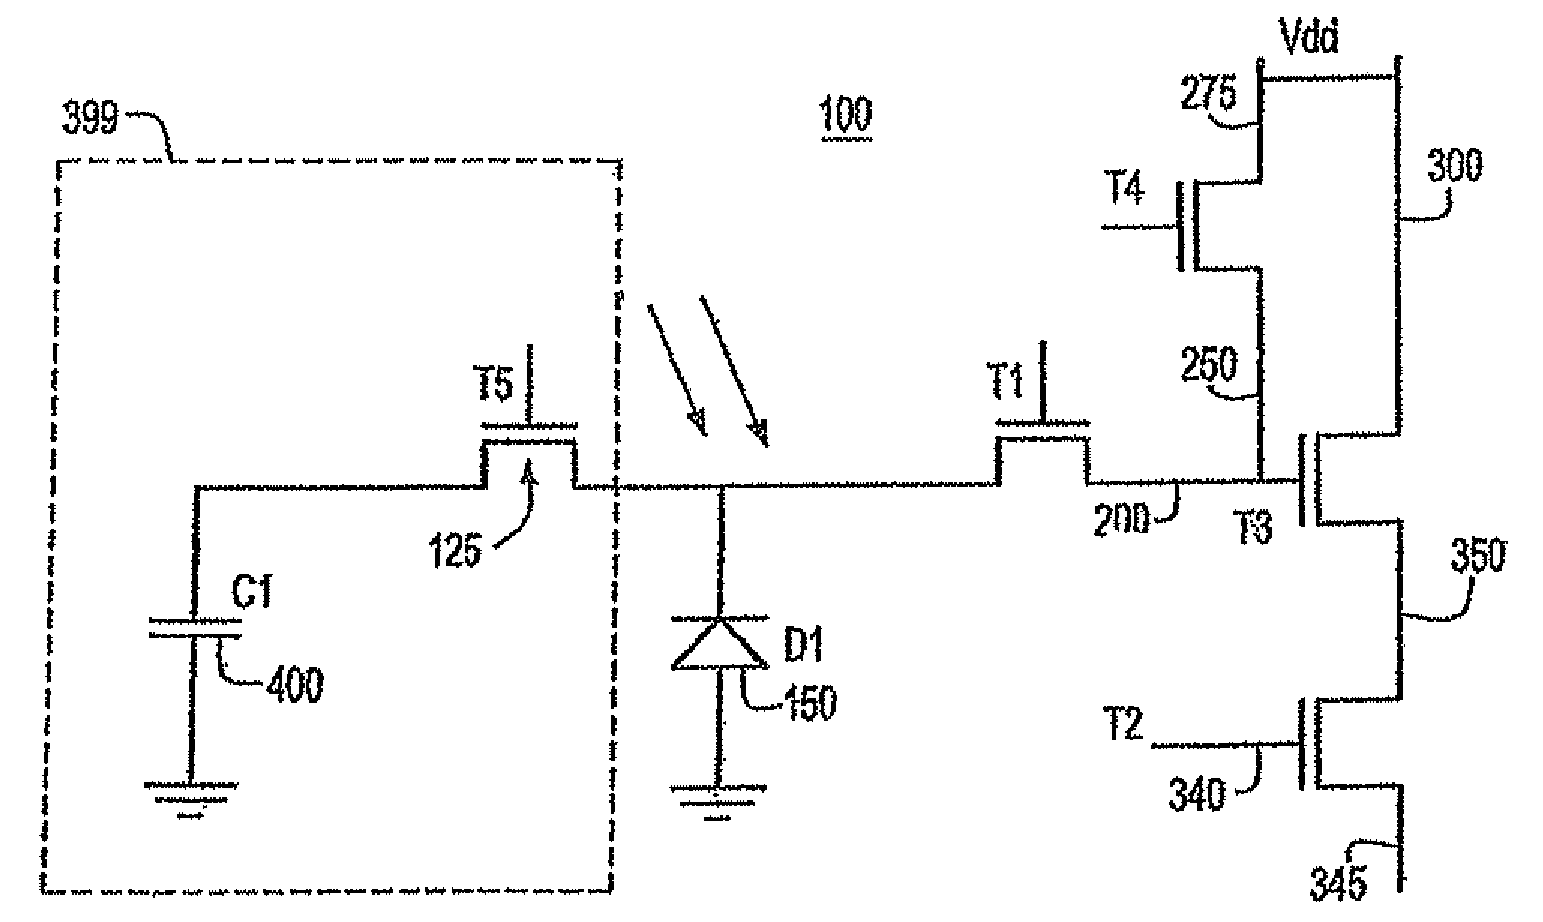 High dynamic range imaging cell with electronic shutter extensions